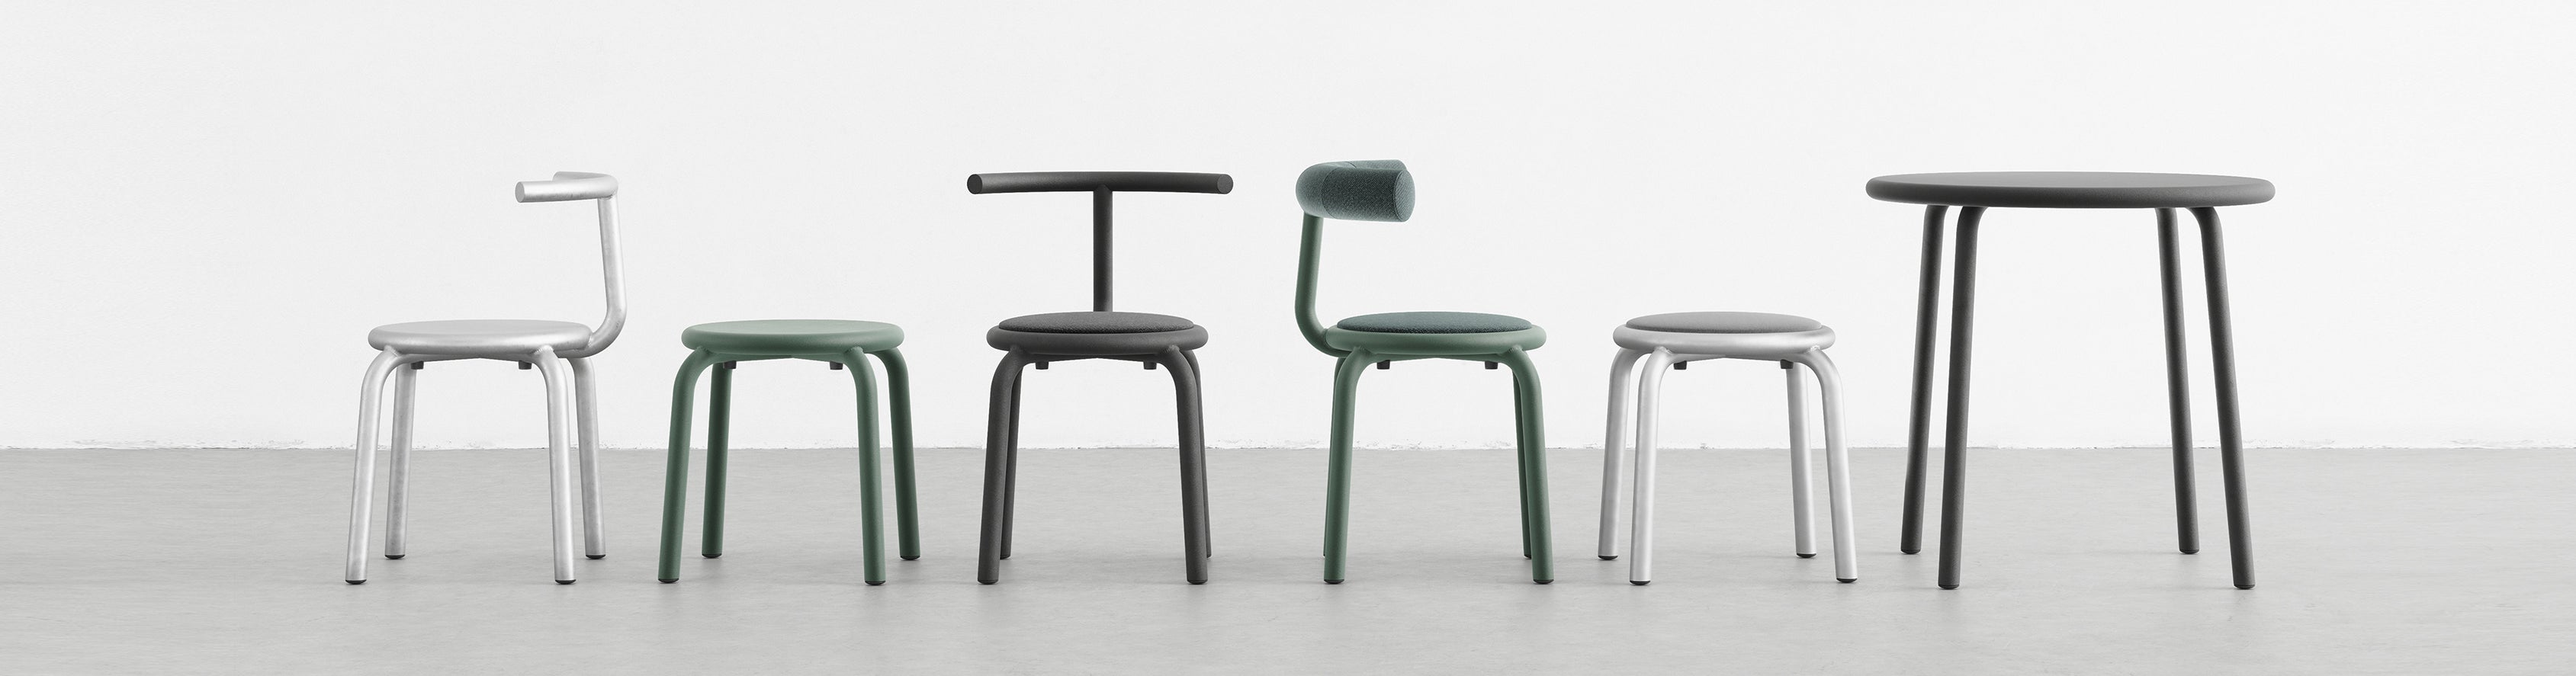 +Halle Torno Chair Hospitality Seating